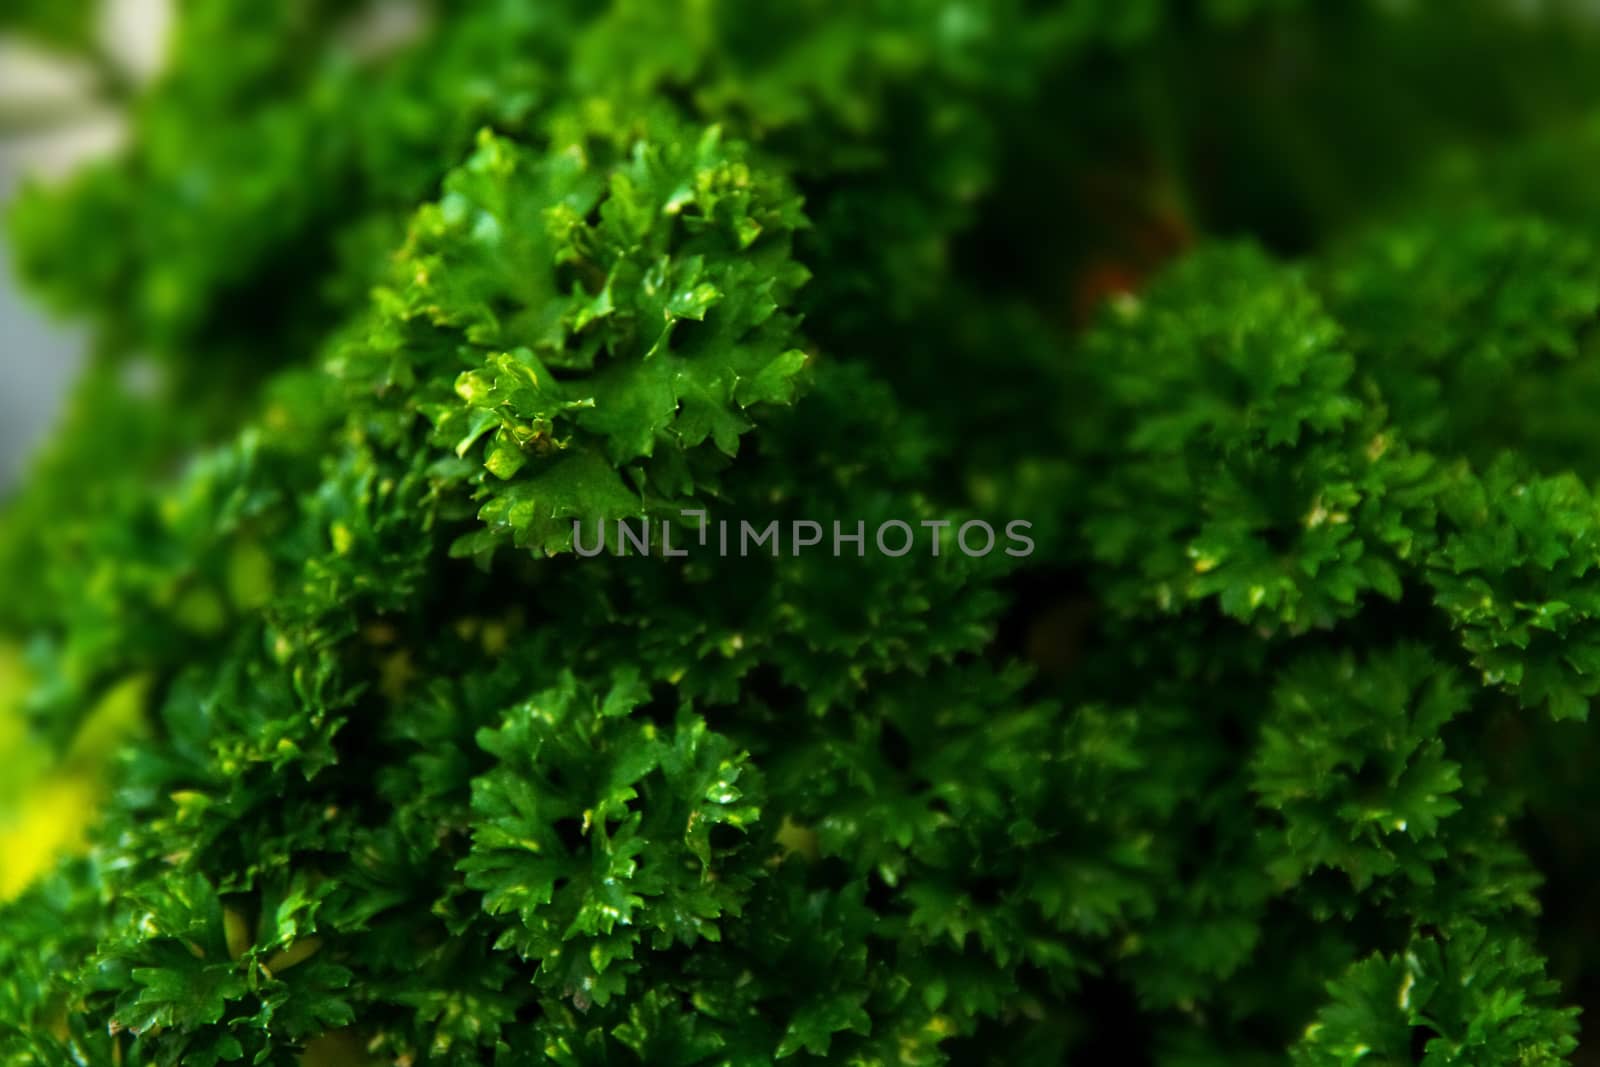 a close up shot of a fresh green parsely plant or herb